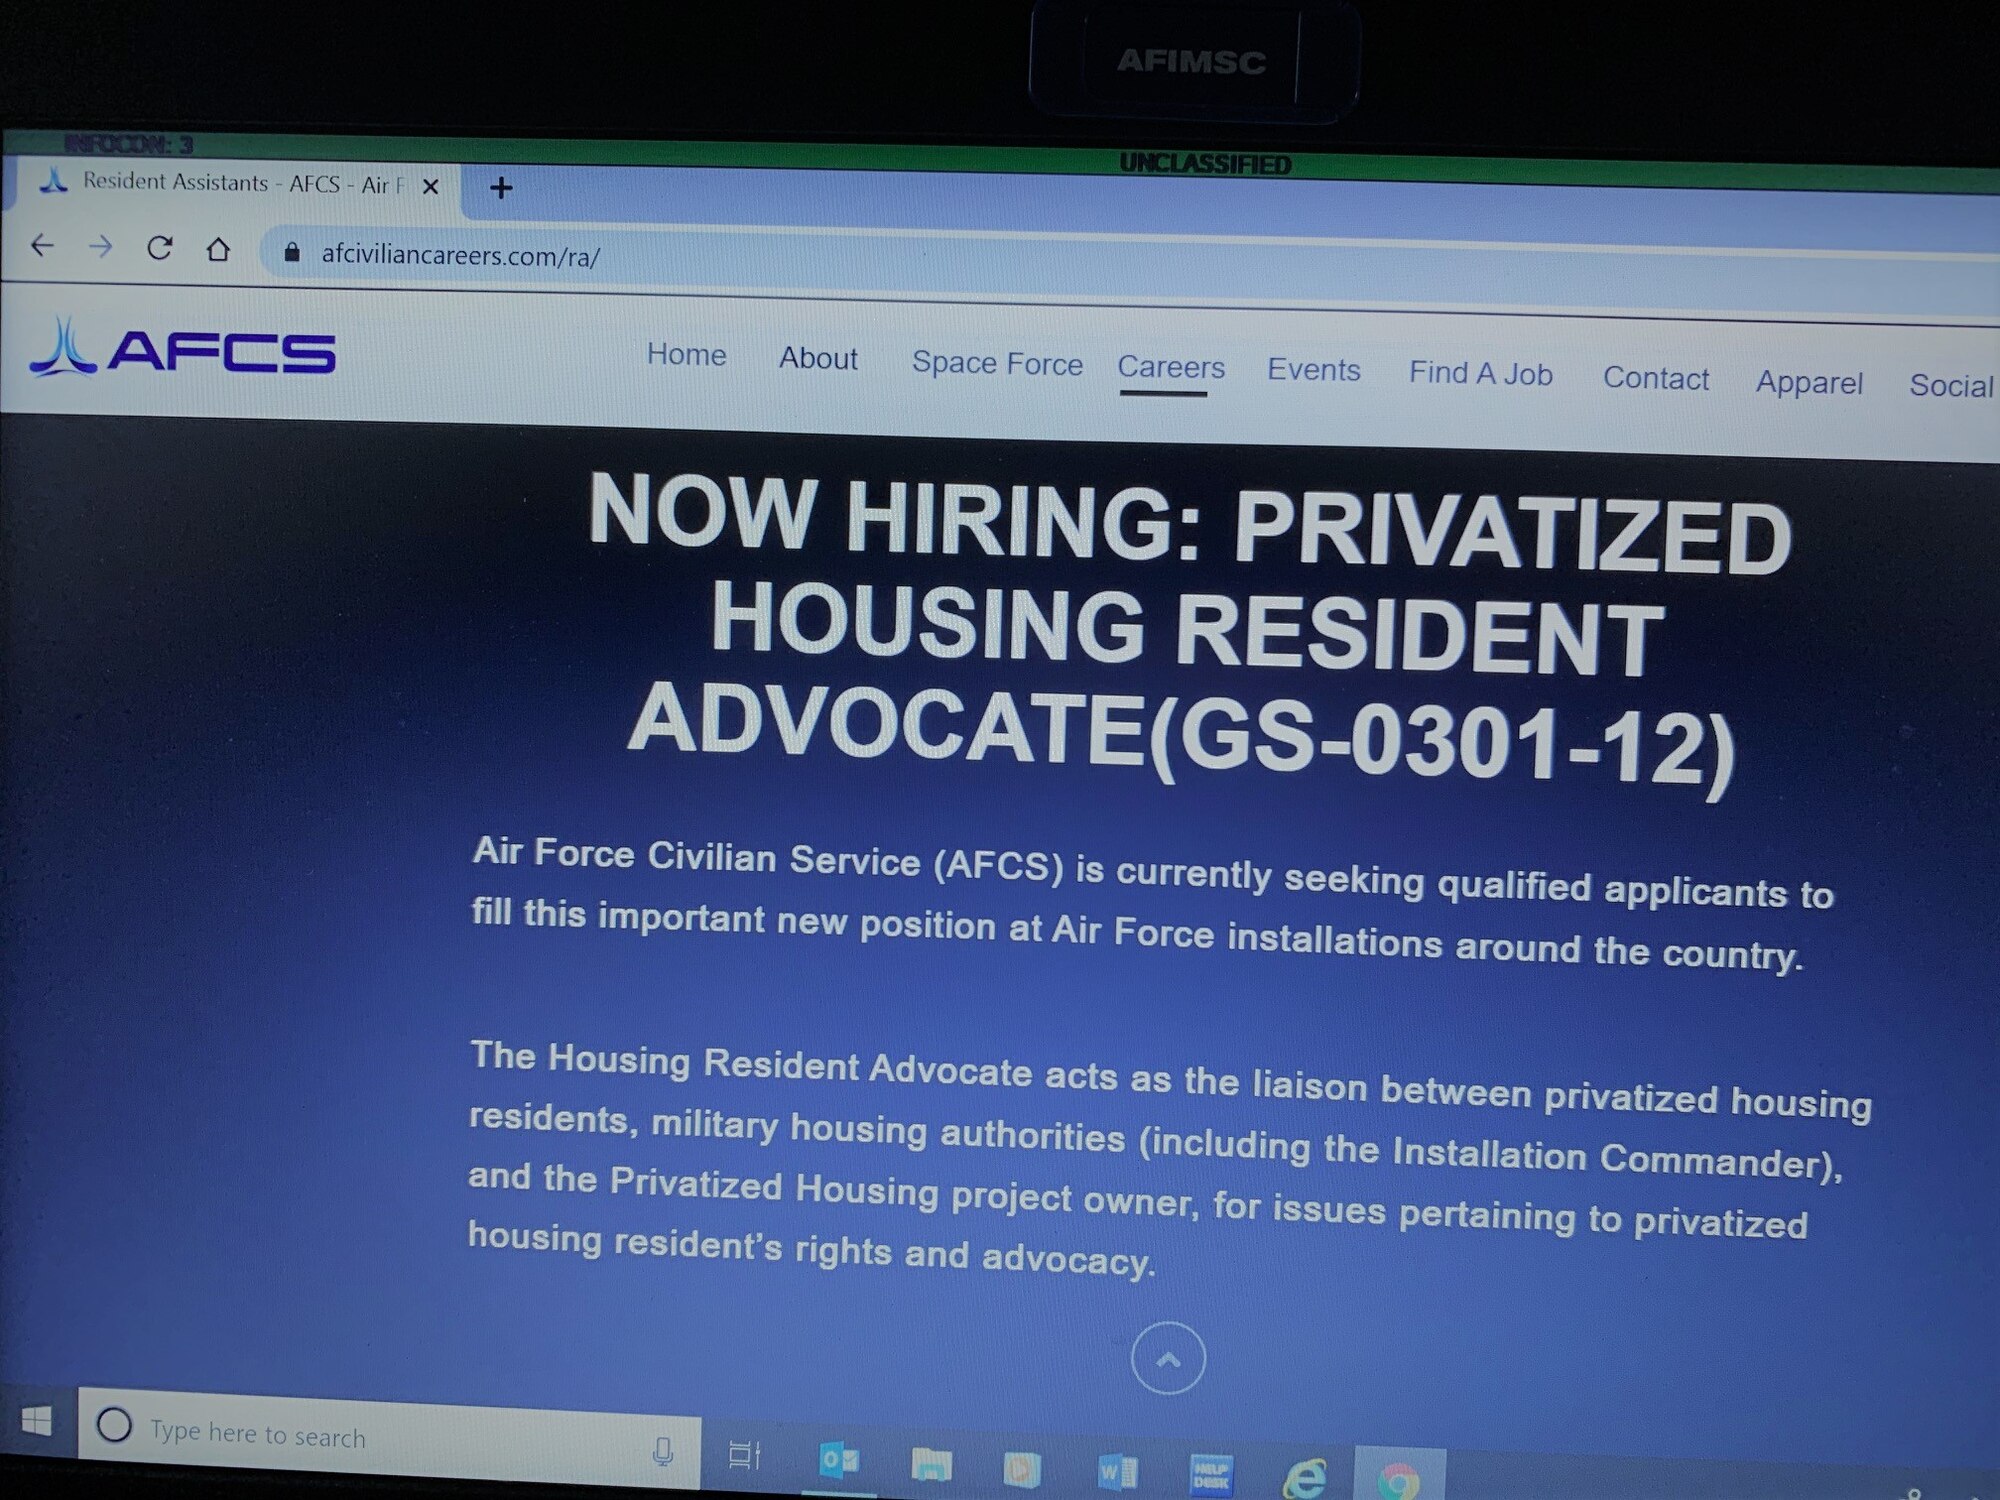 Photo showing now hiring privatized housing resident advocates